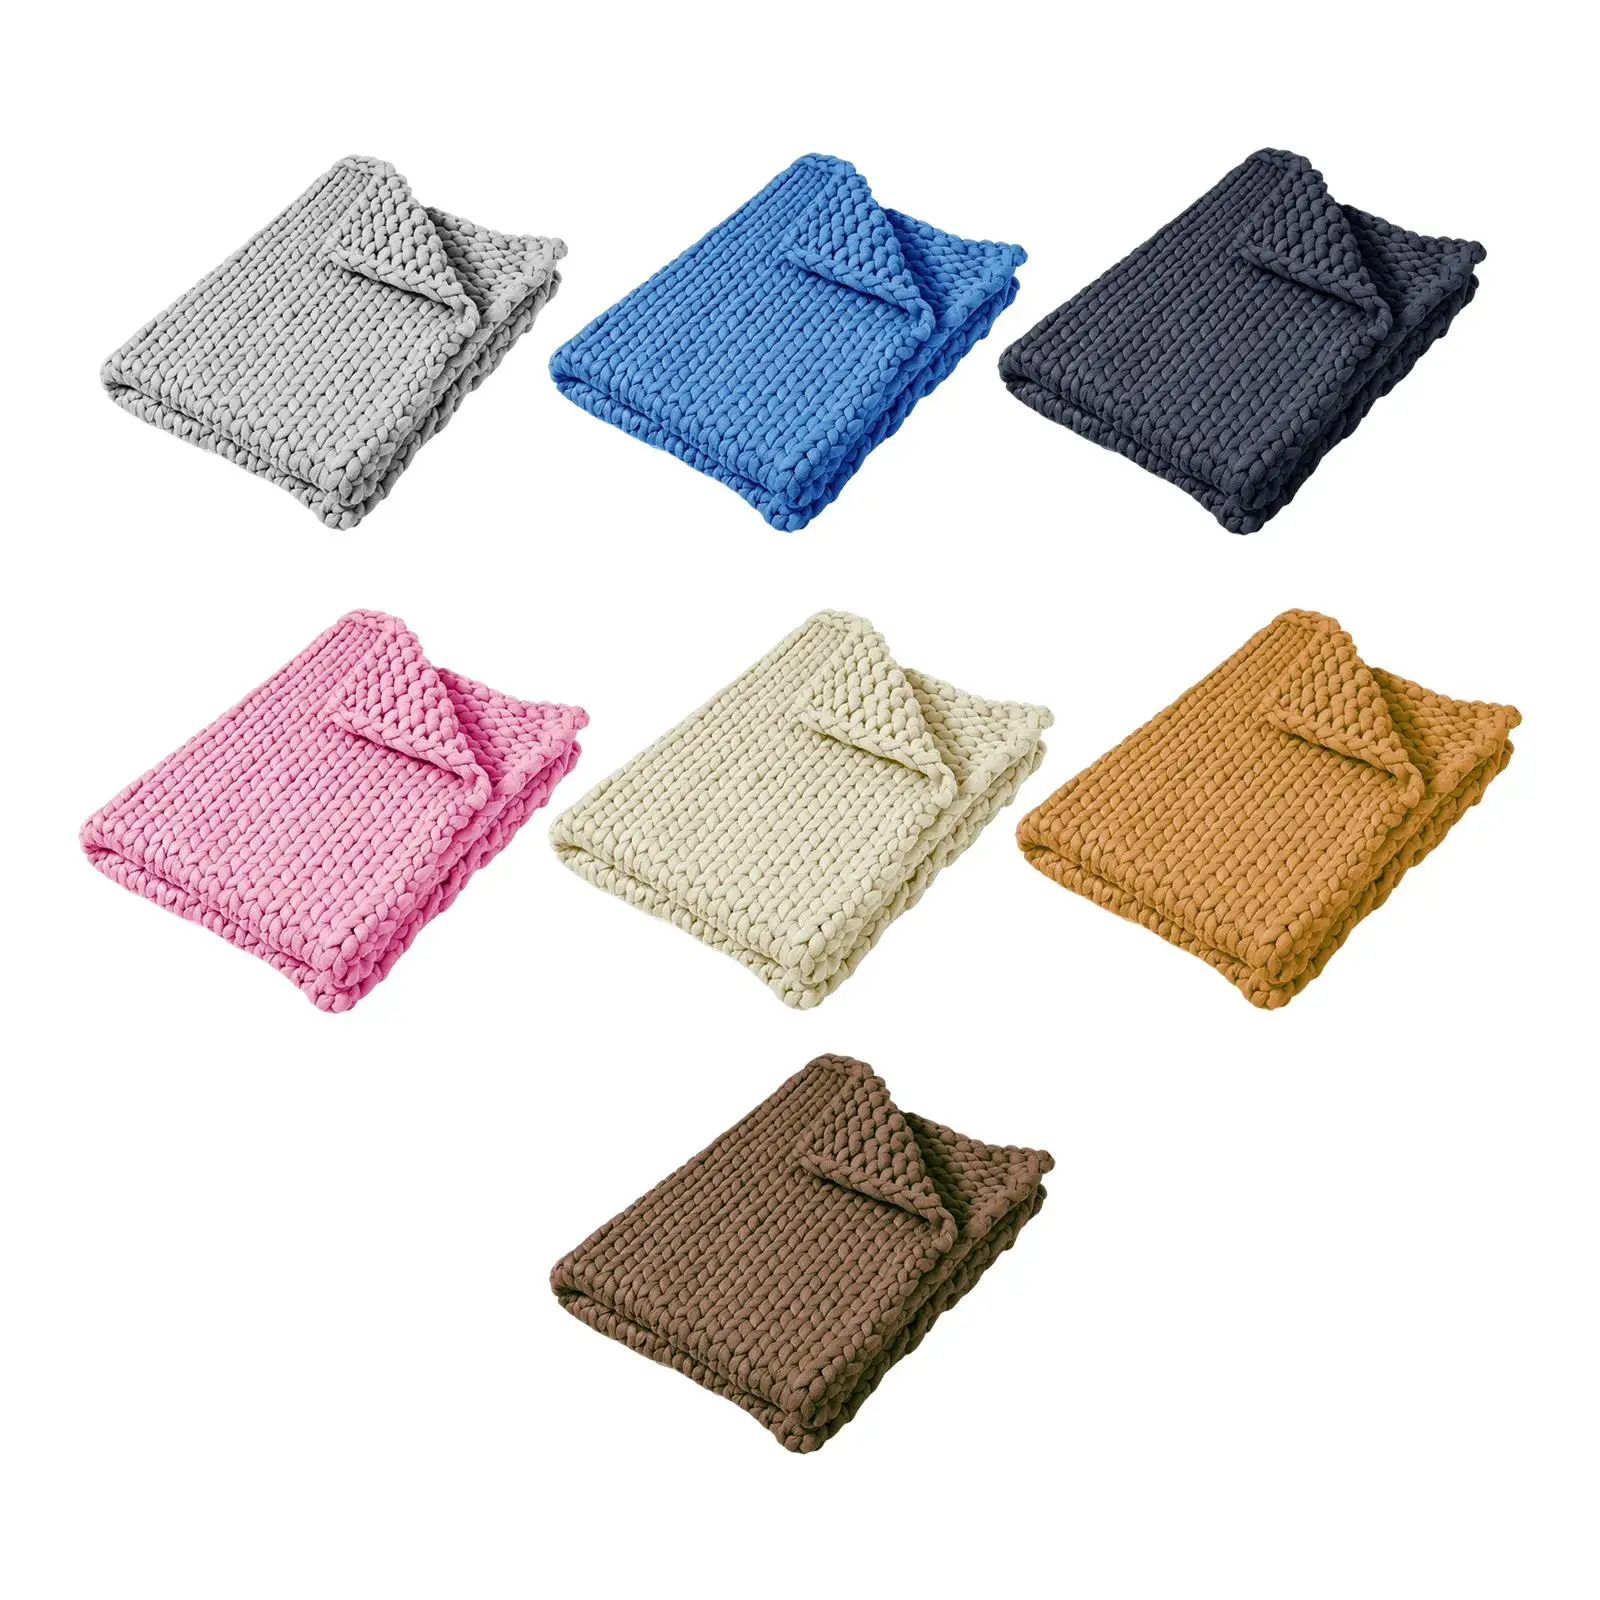 Fashion Chunky Yarn Blanket Throw Blanket Knitted Blanket for Living Room Couch Decor